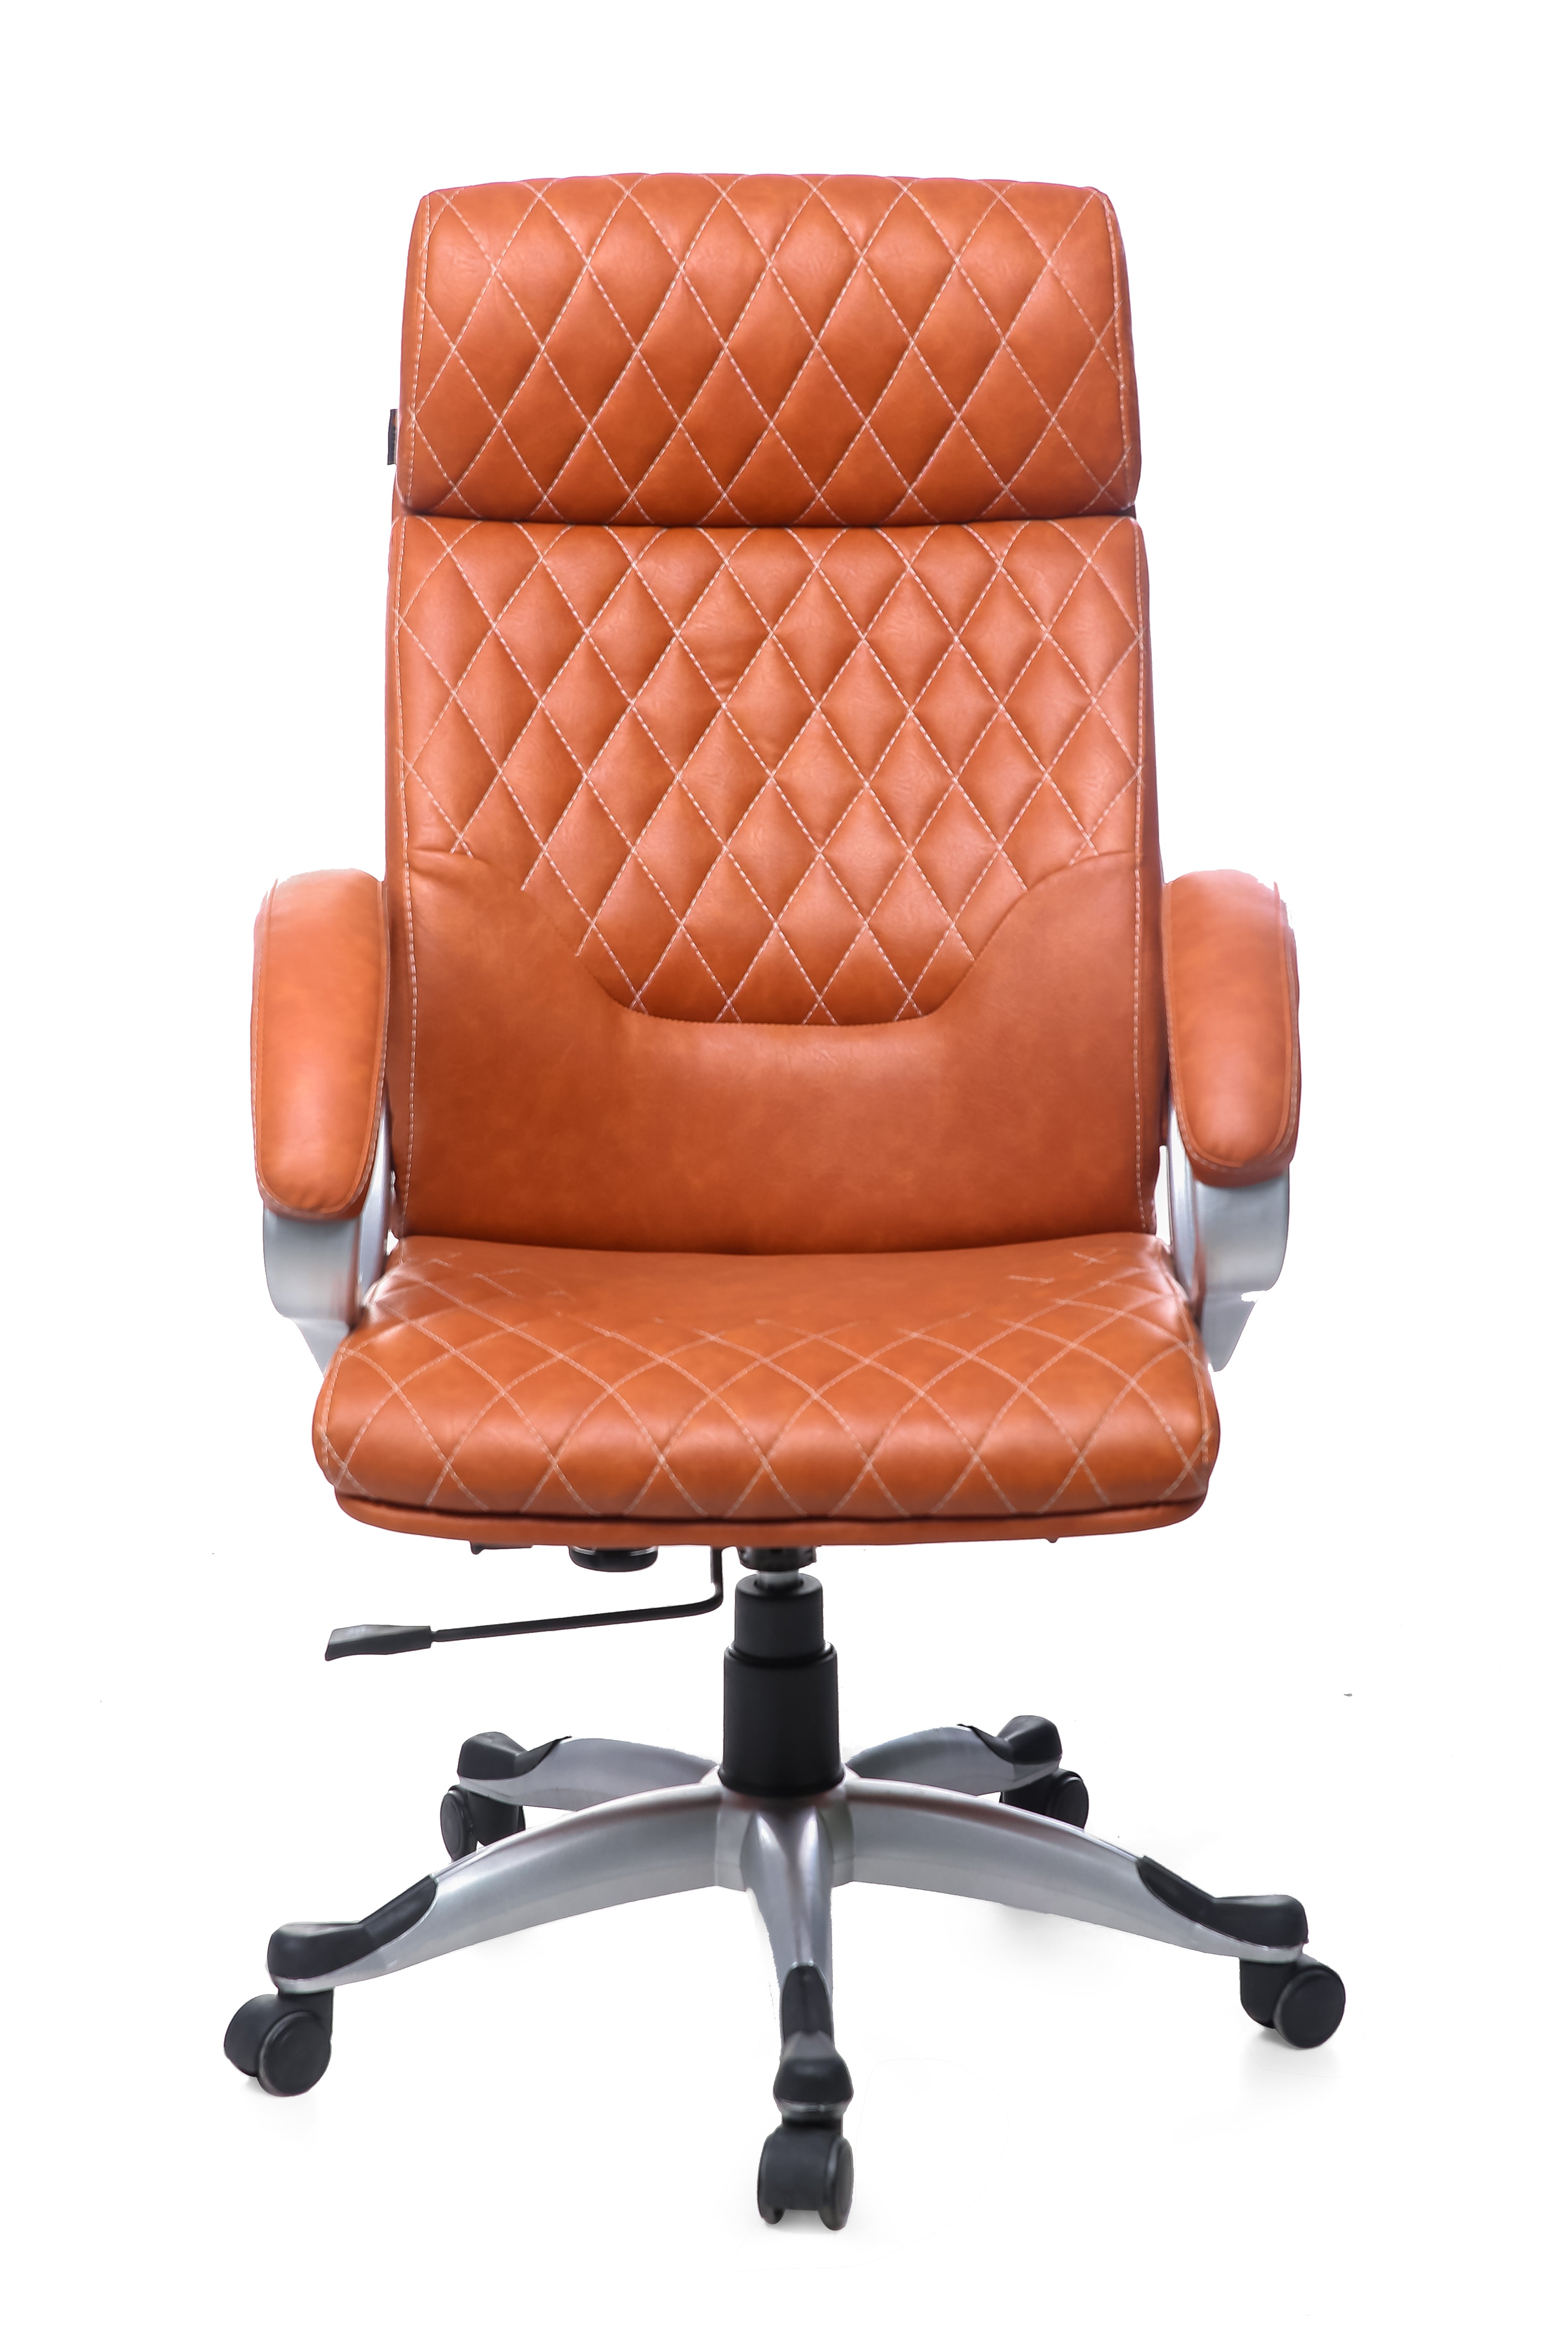 Detec™ High Back Executive Office Chair in TAN Color